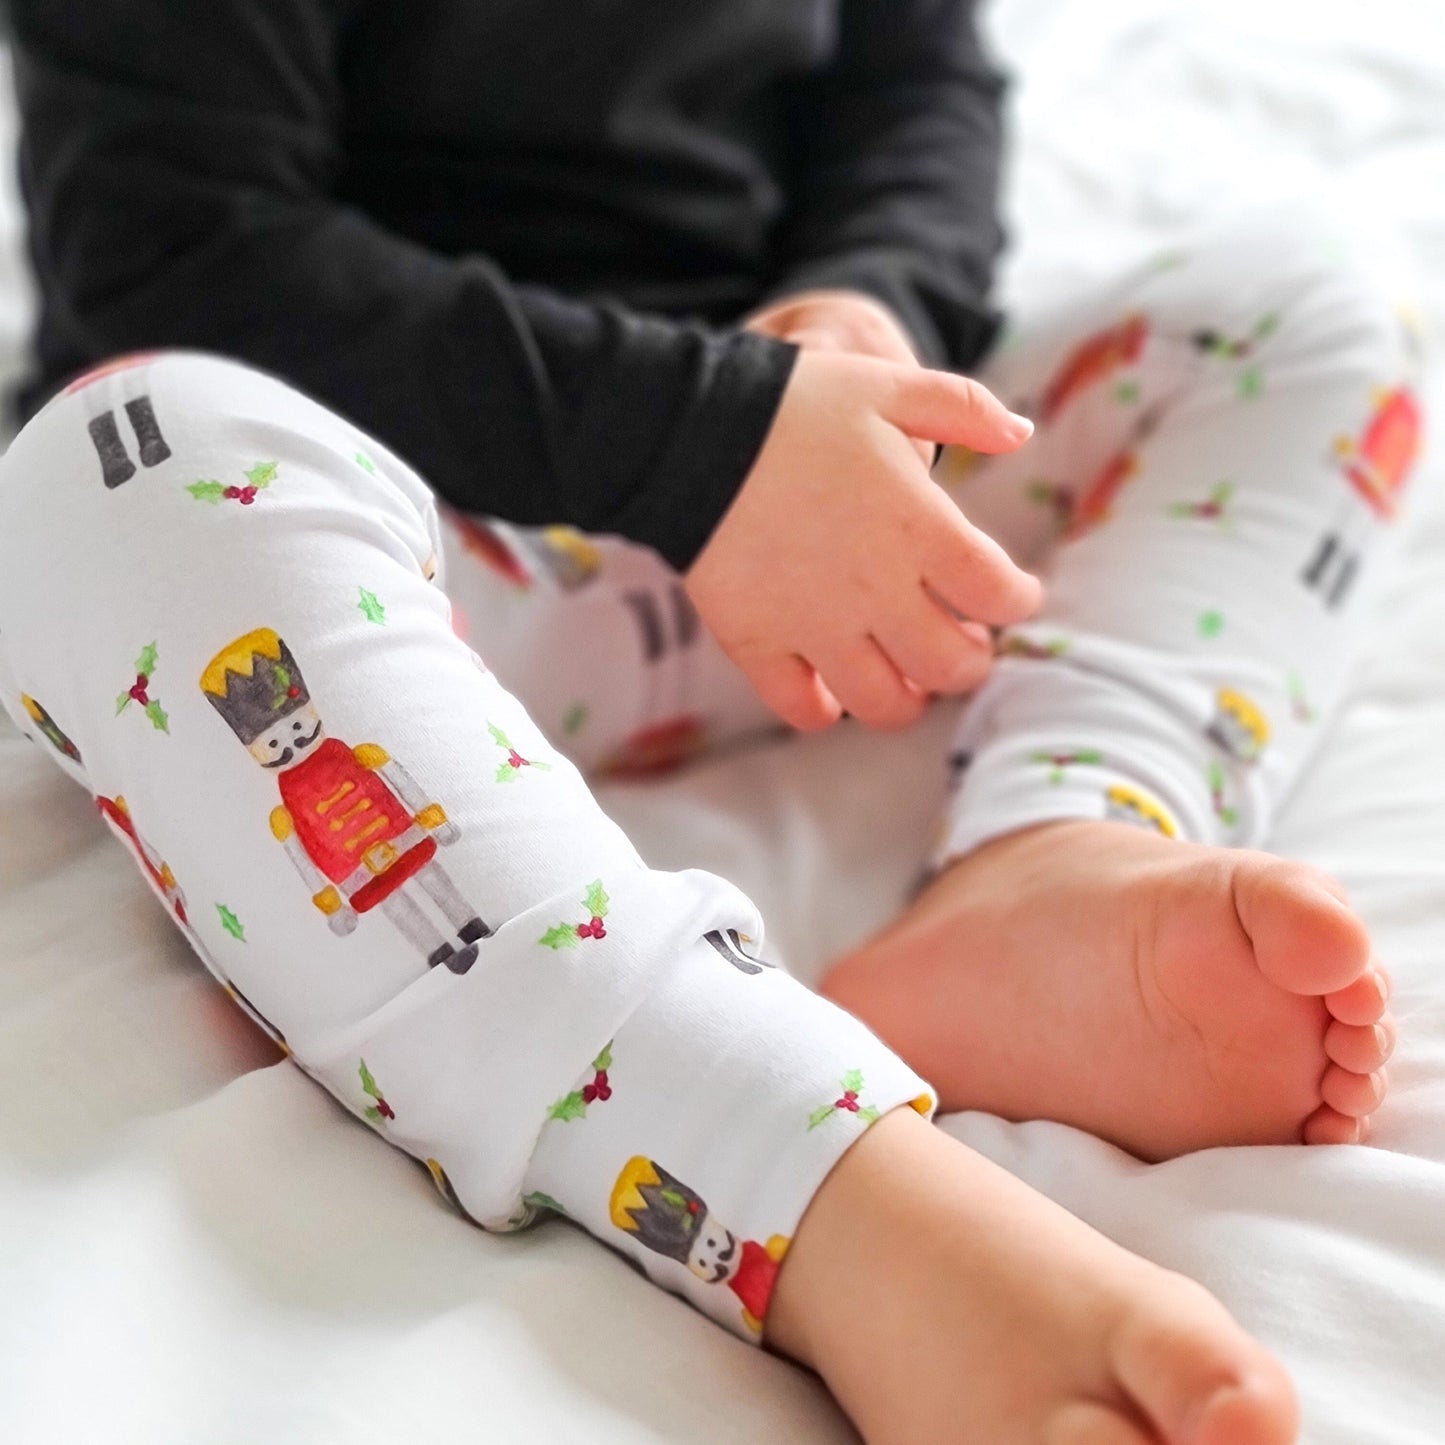 SALE Nutcrackers Baby & Child Leggings (READY TO POST)